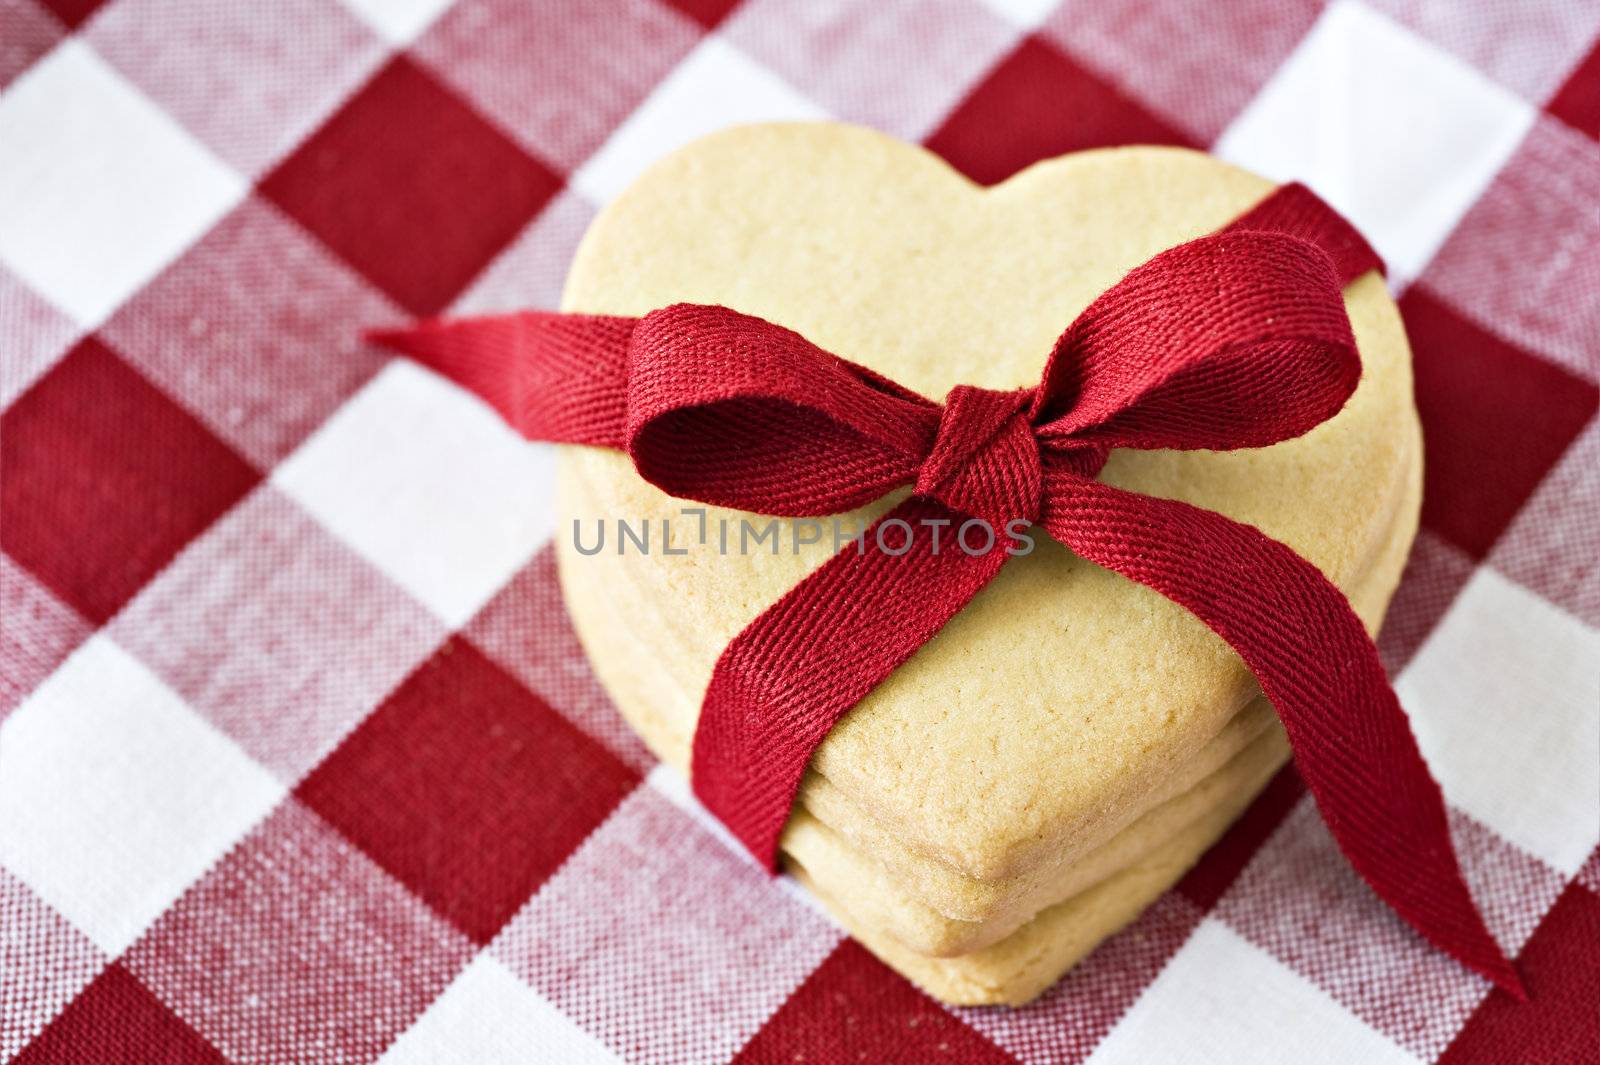 Heart shaped cookies with a red ribbon on cloth